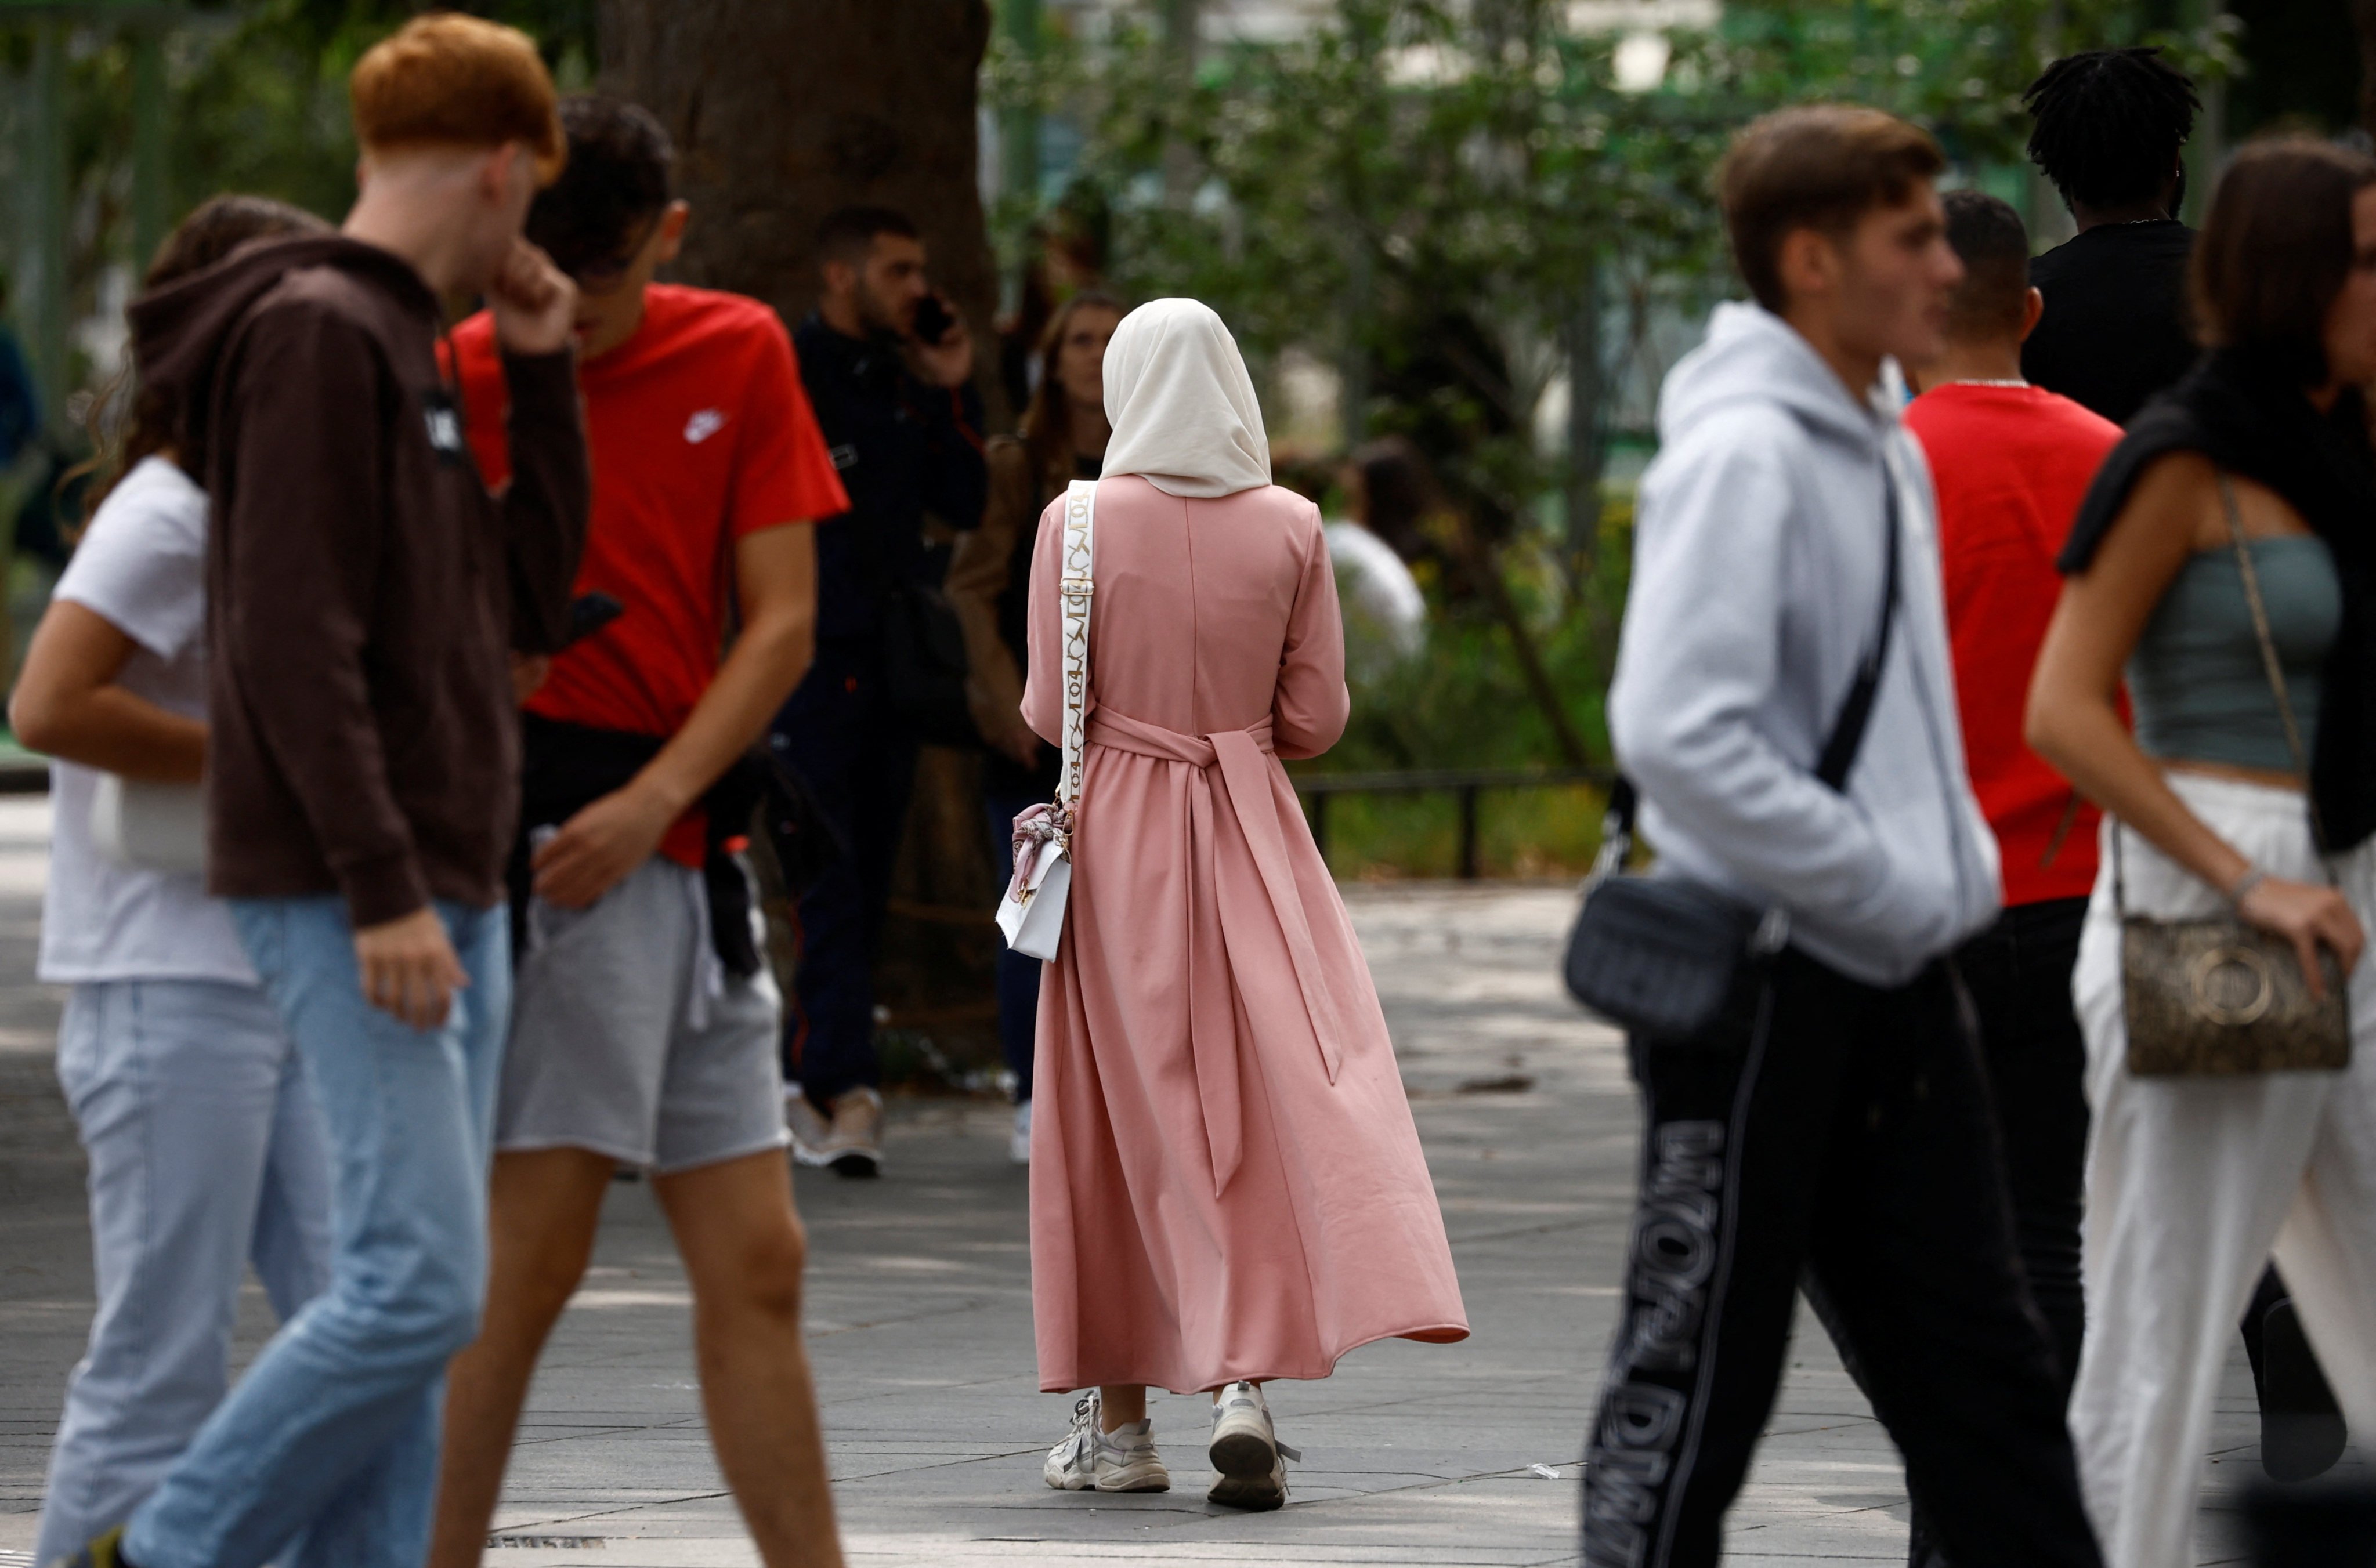 A woman in an abaya (centre) walks down a street in Nantes, France in August. Photo: Reuters